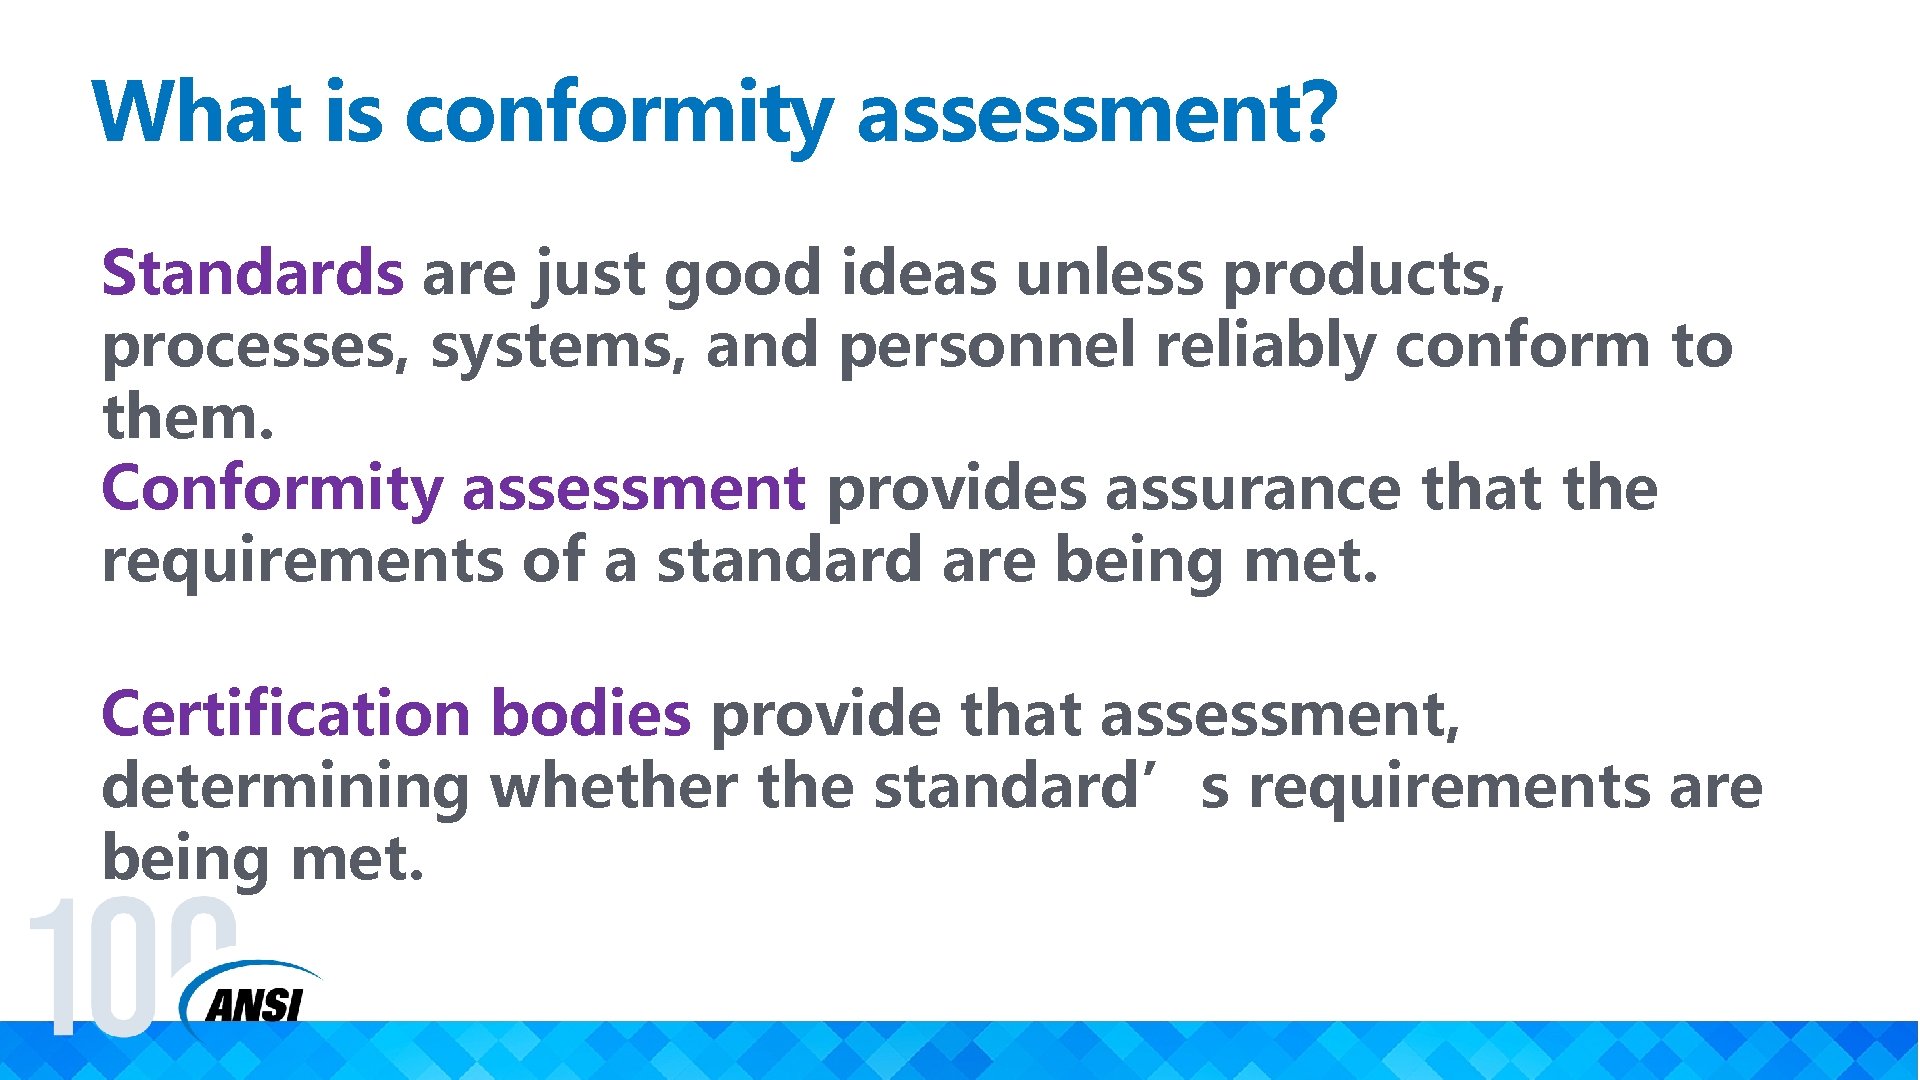 What is conformity assessment? Standards are just good ideas unless products, processes, systems, and